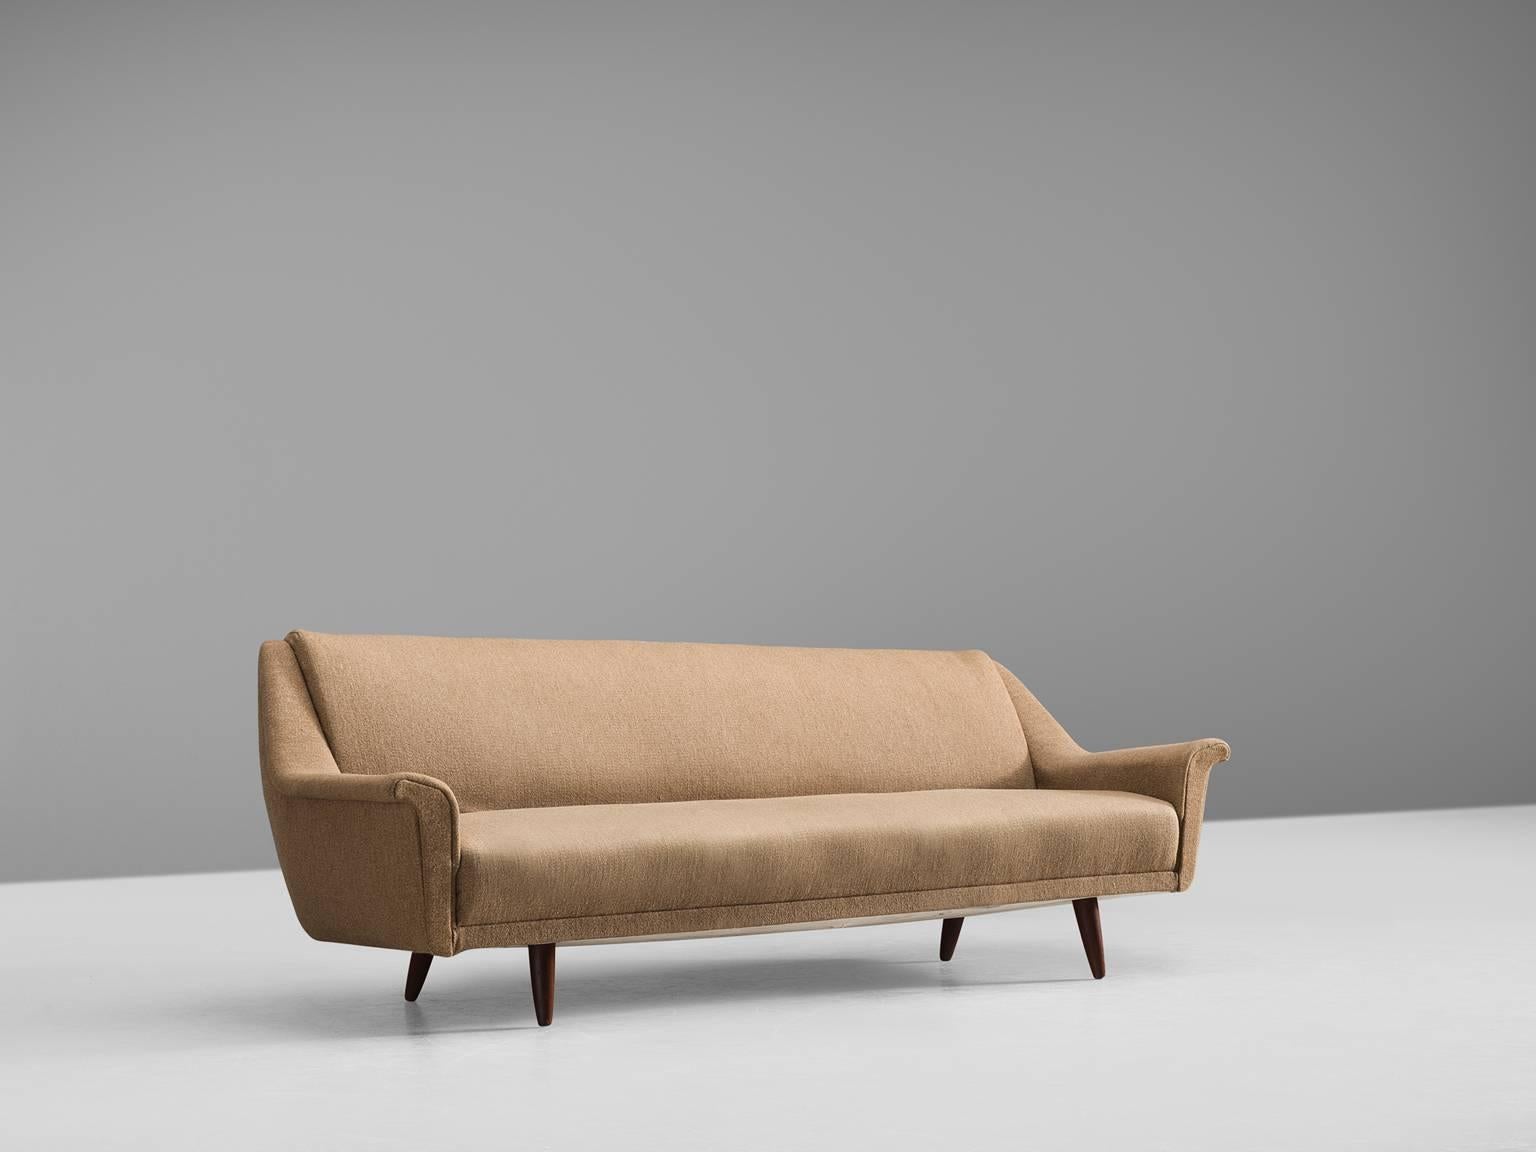 Settee, beige to sand fabric, wood, Denmark, 1950s

This sofa holds the middle between theatrical details that are used on a minimalistic base. The tapered wooden legs are accompanied by a neutral sand to beige colored thick fabric that functions as